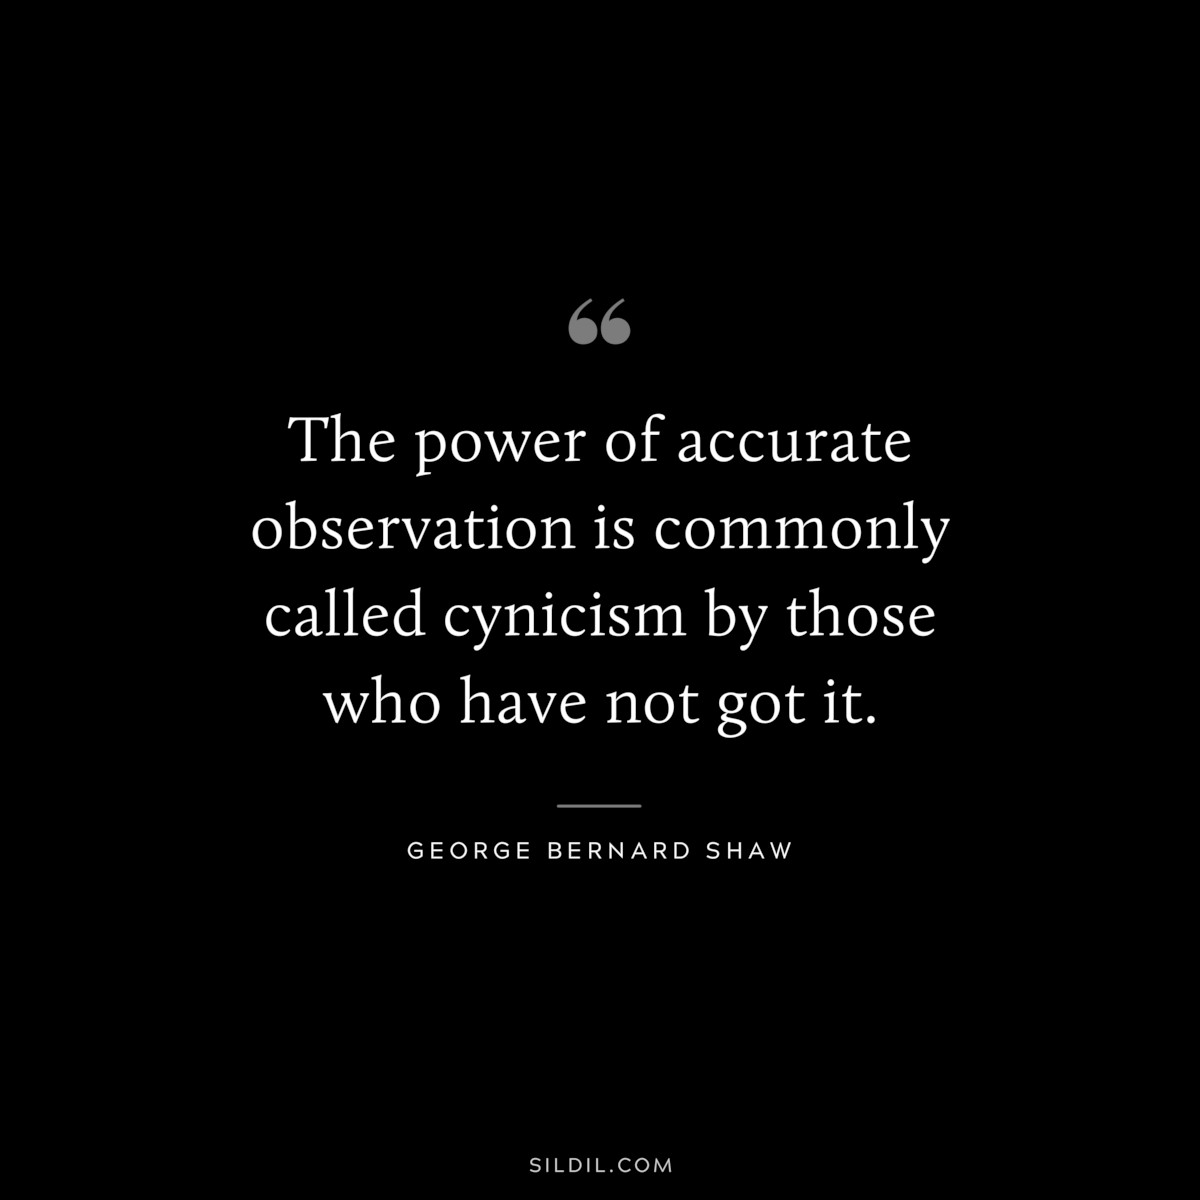 The power of accurate observation is commonly called cynicism by those who have not got it. ― George Bernard Shaw